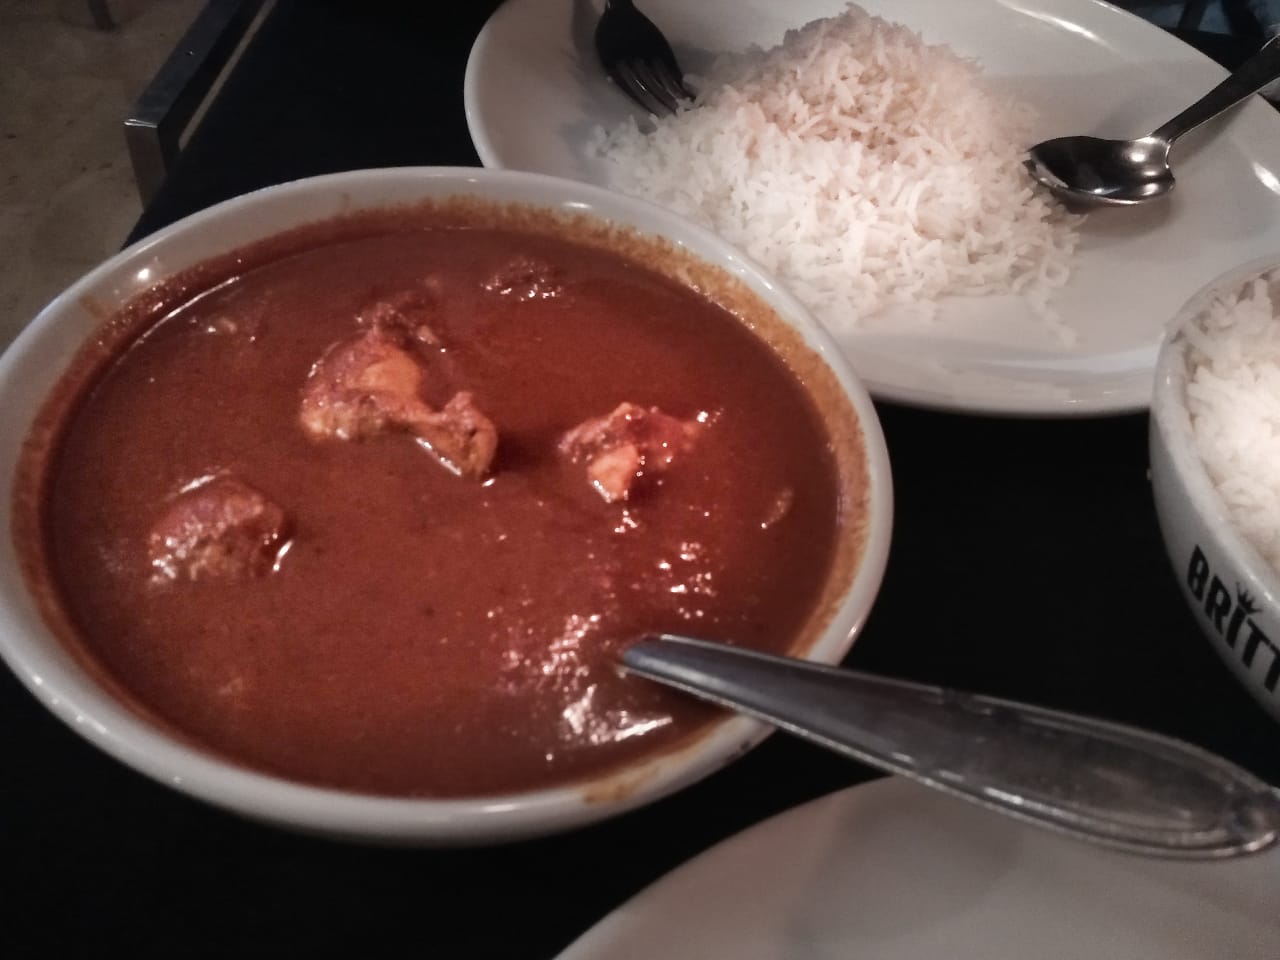 The chicken vindaloo with rice for dinner.